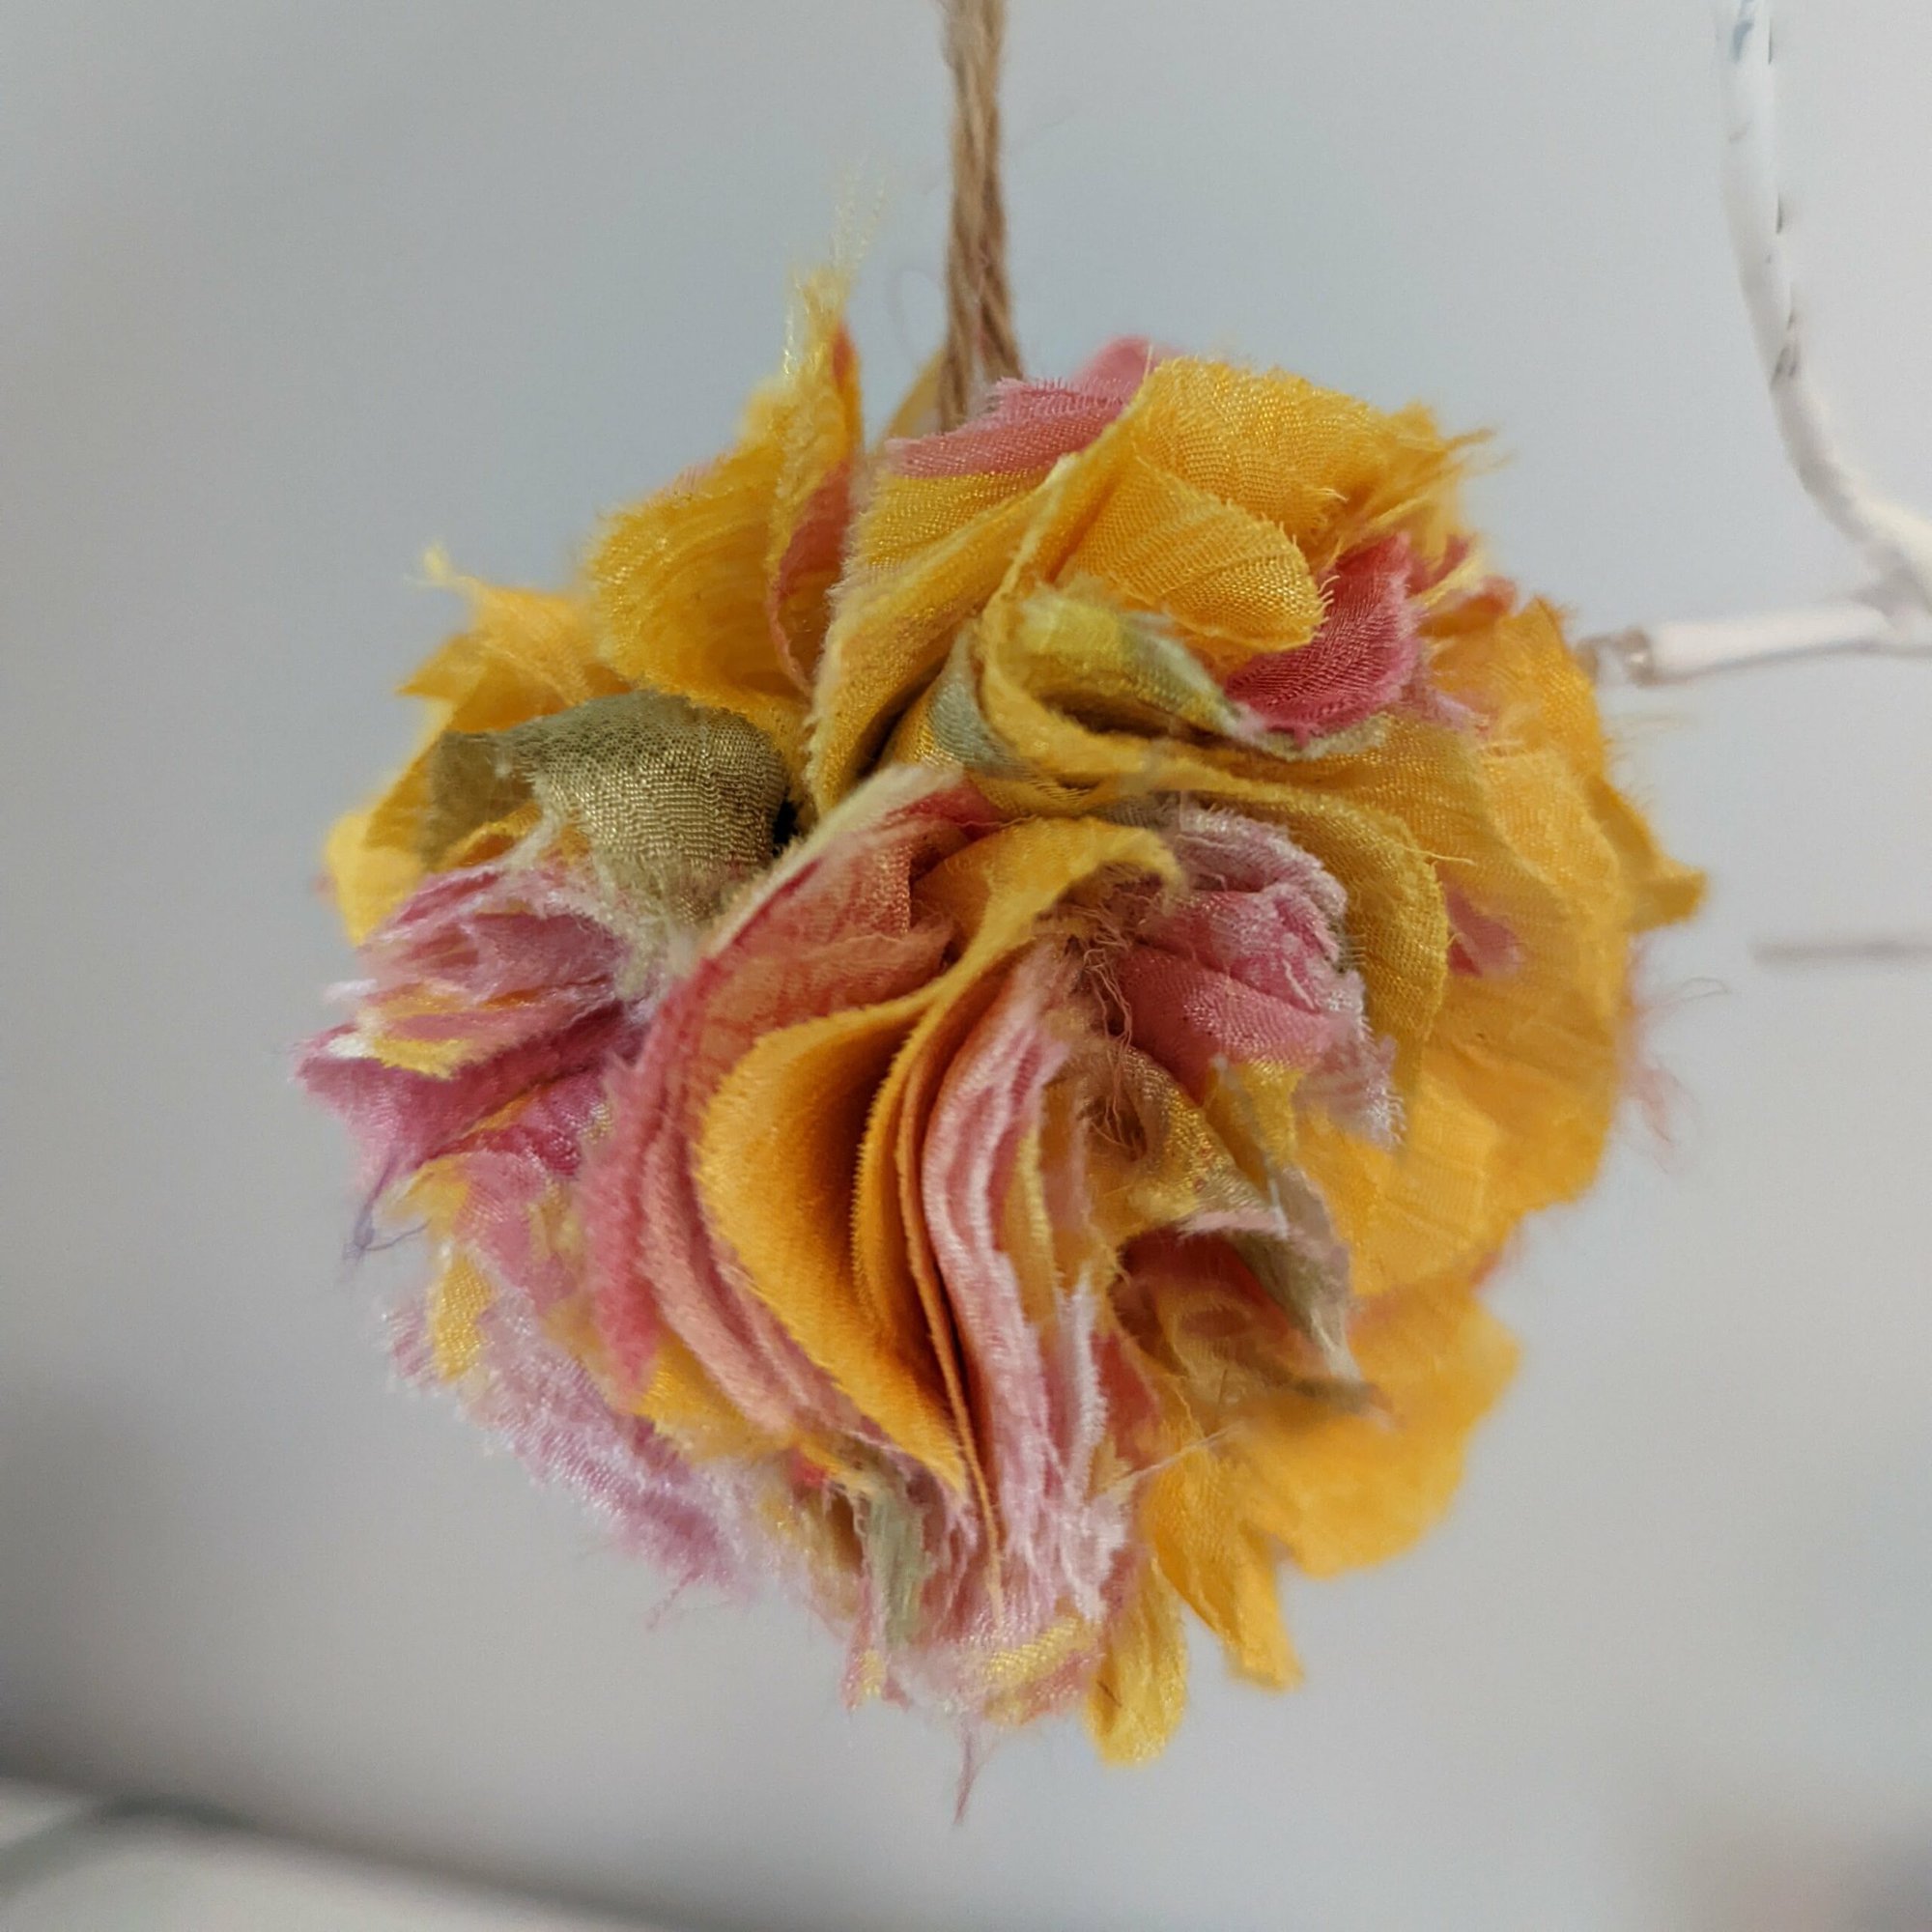 Upcycled Sari Pom Pom Baubles 3 Pack - Yellows